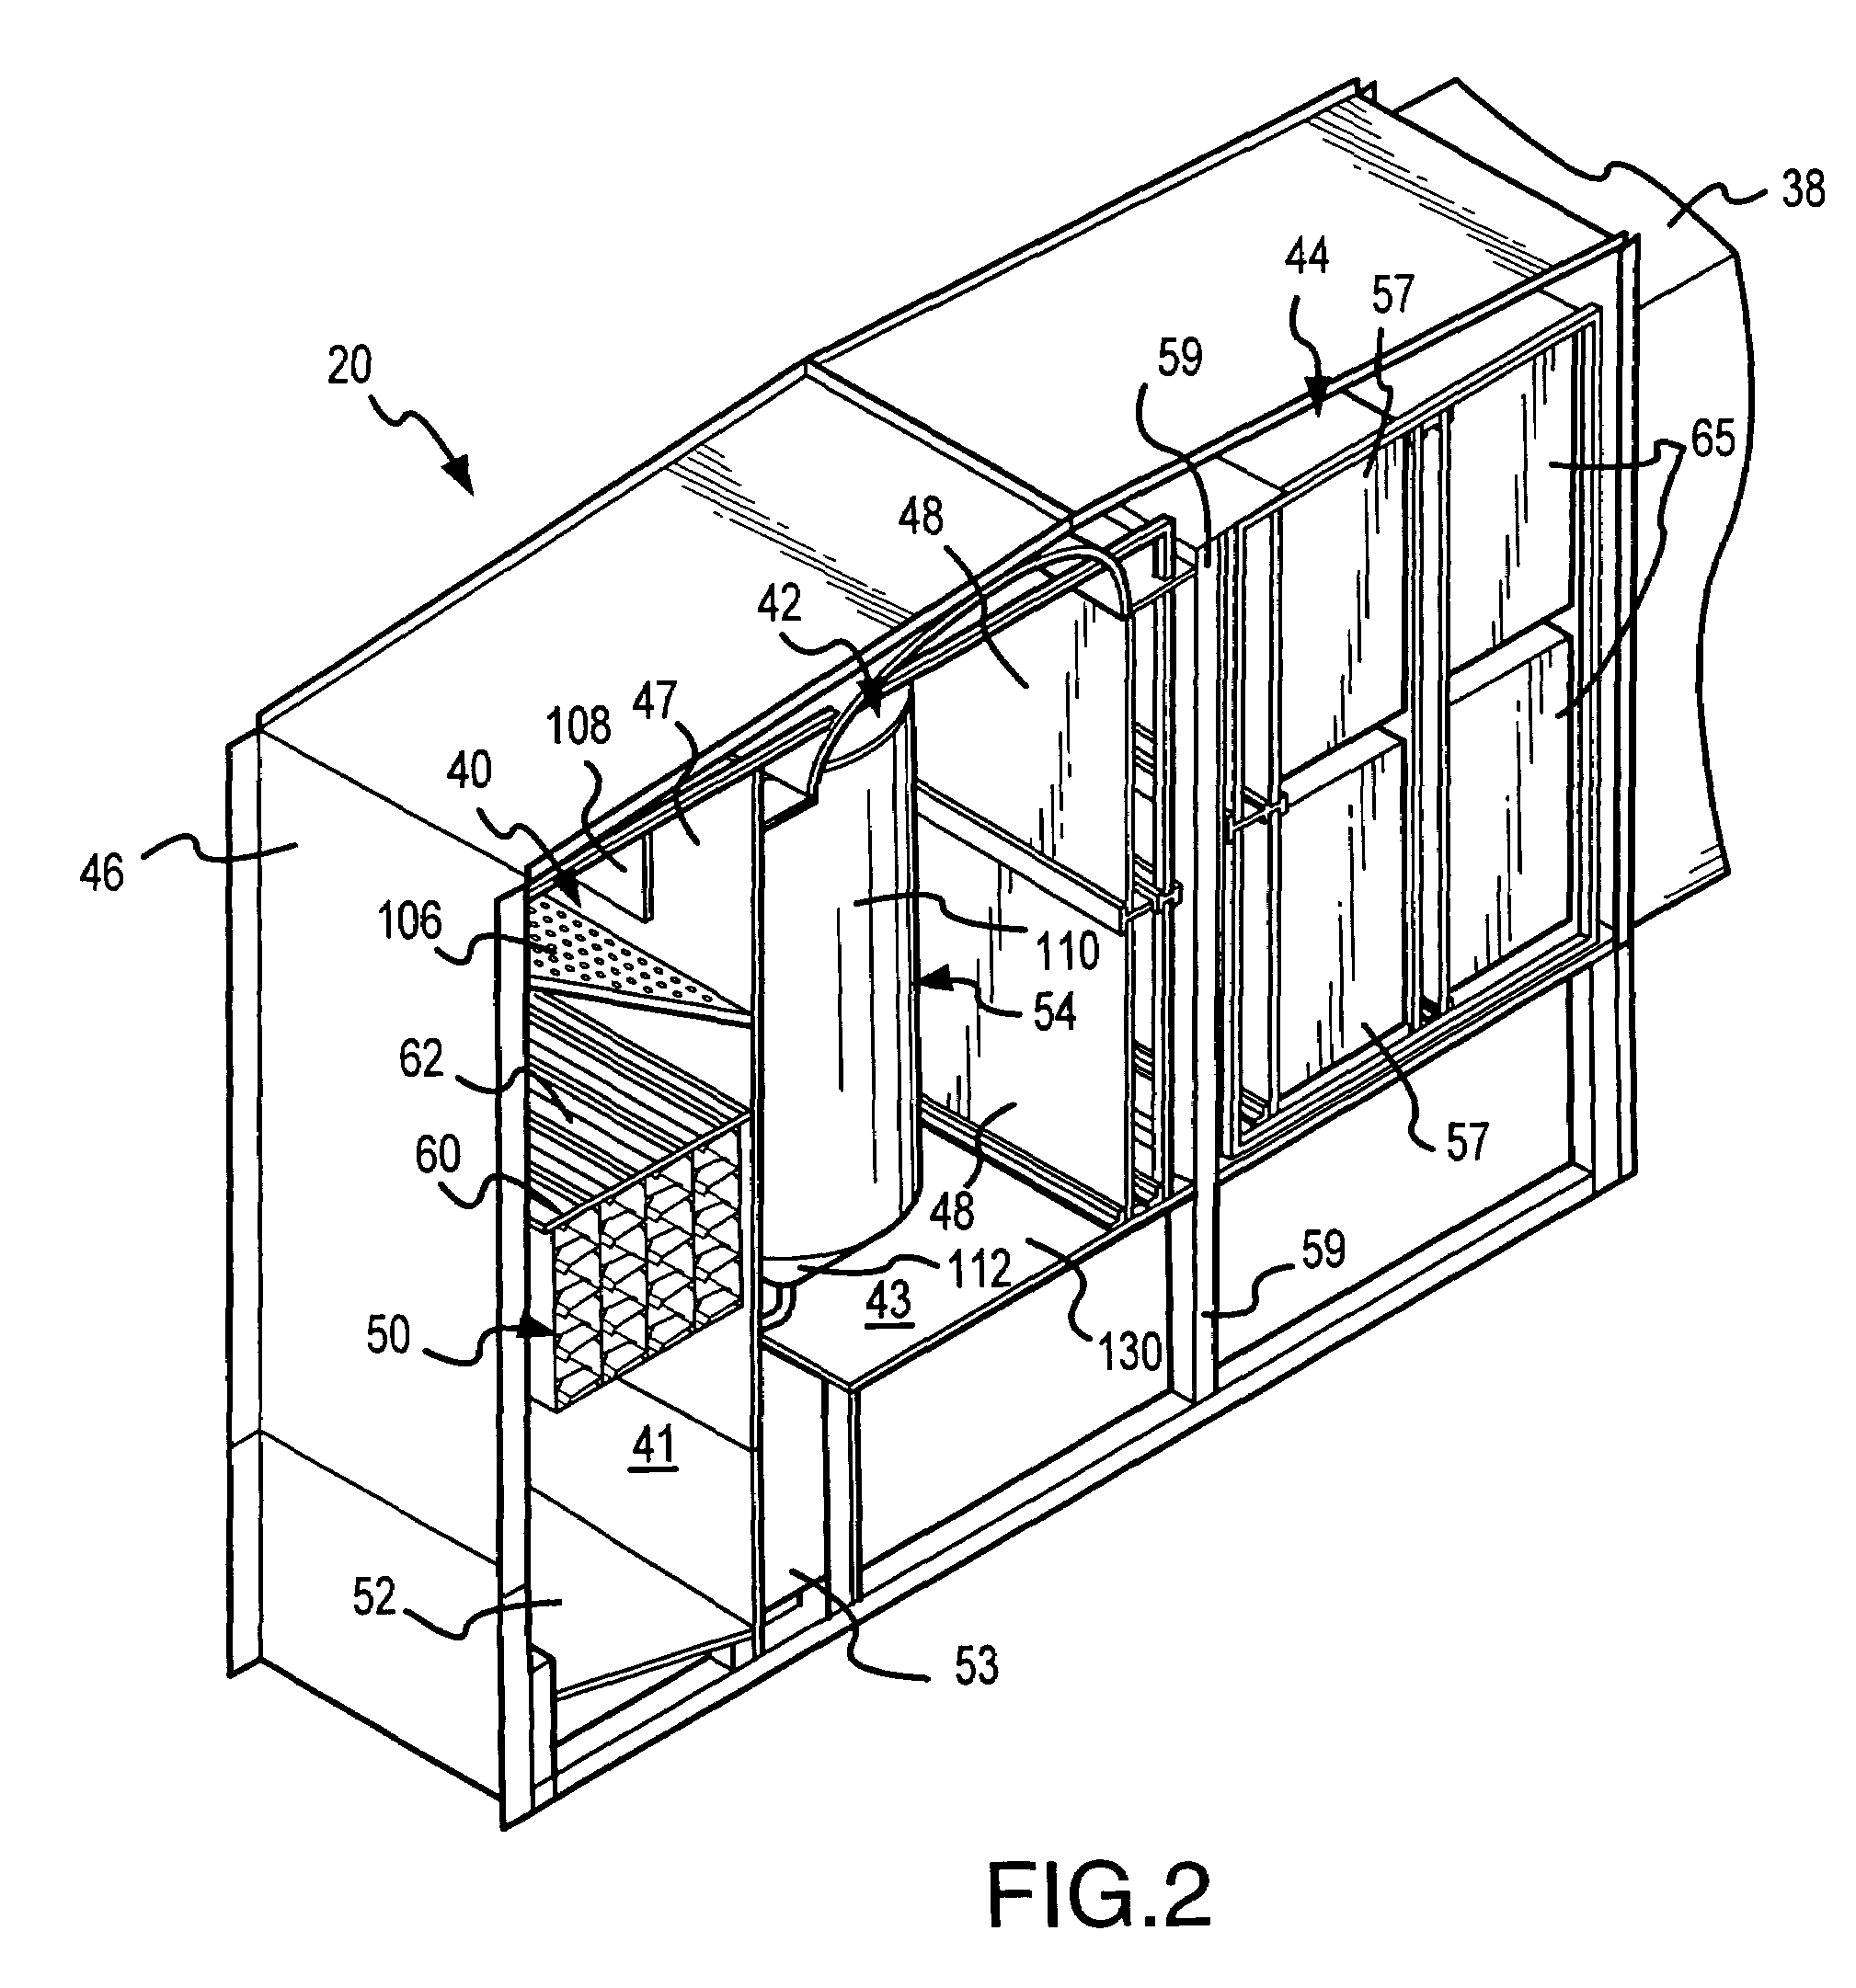 Apparatus and method for cleaning, neutralizing and recirculating exhaust air in a confined environment